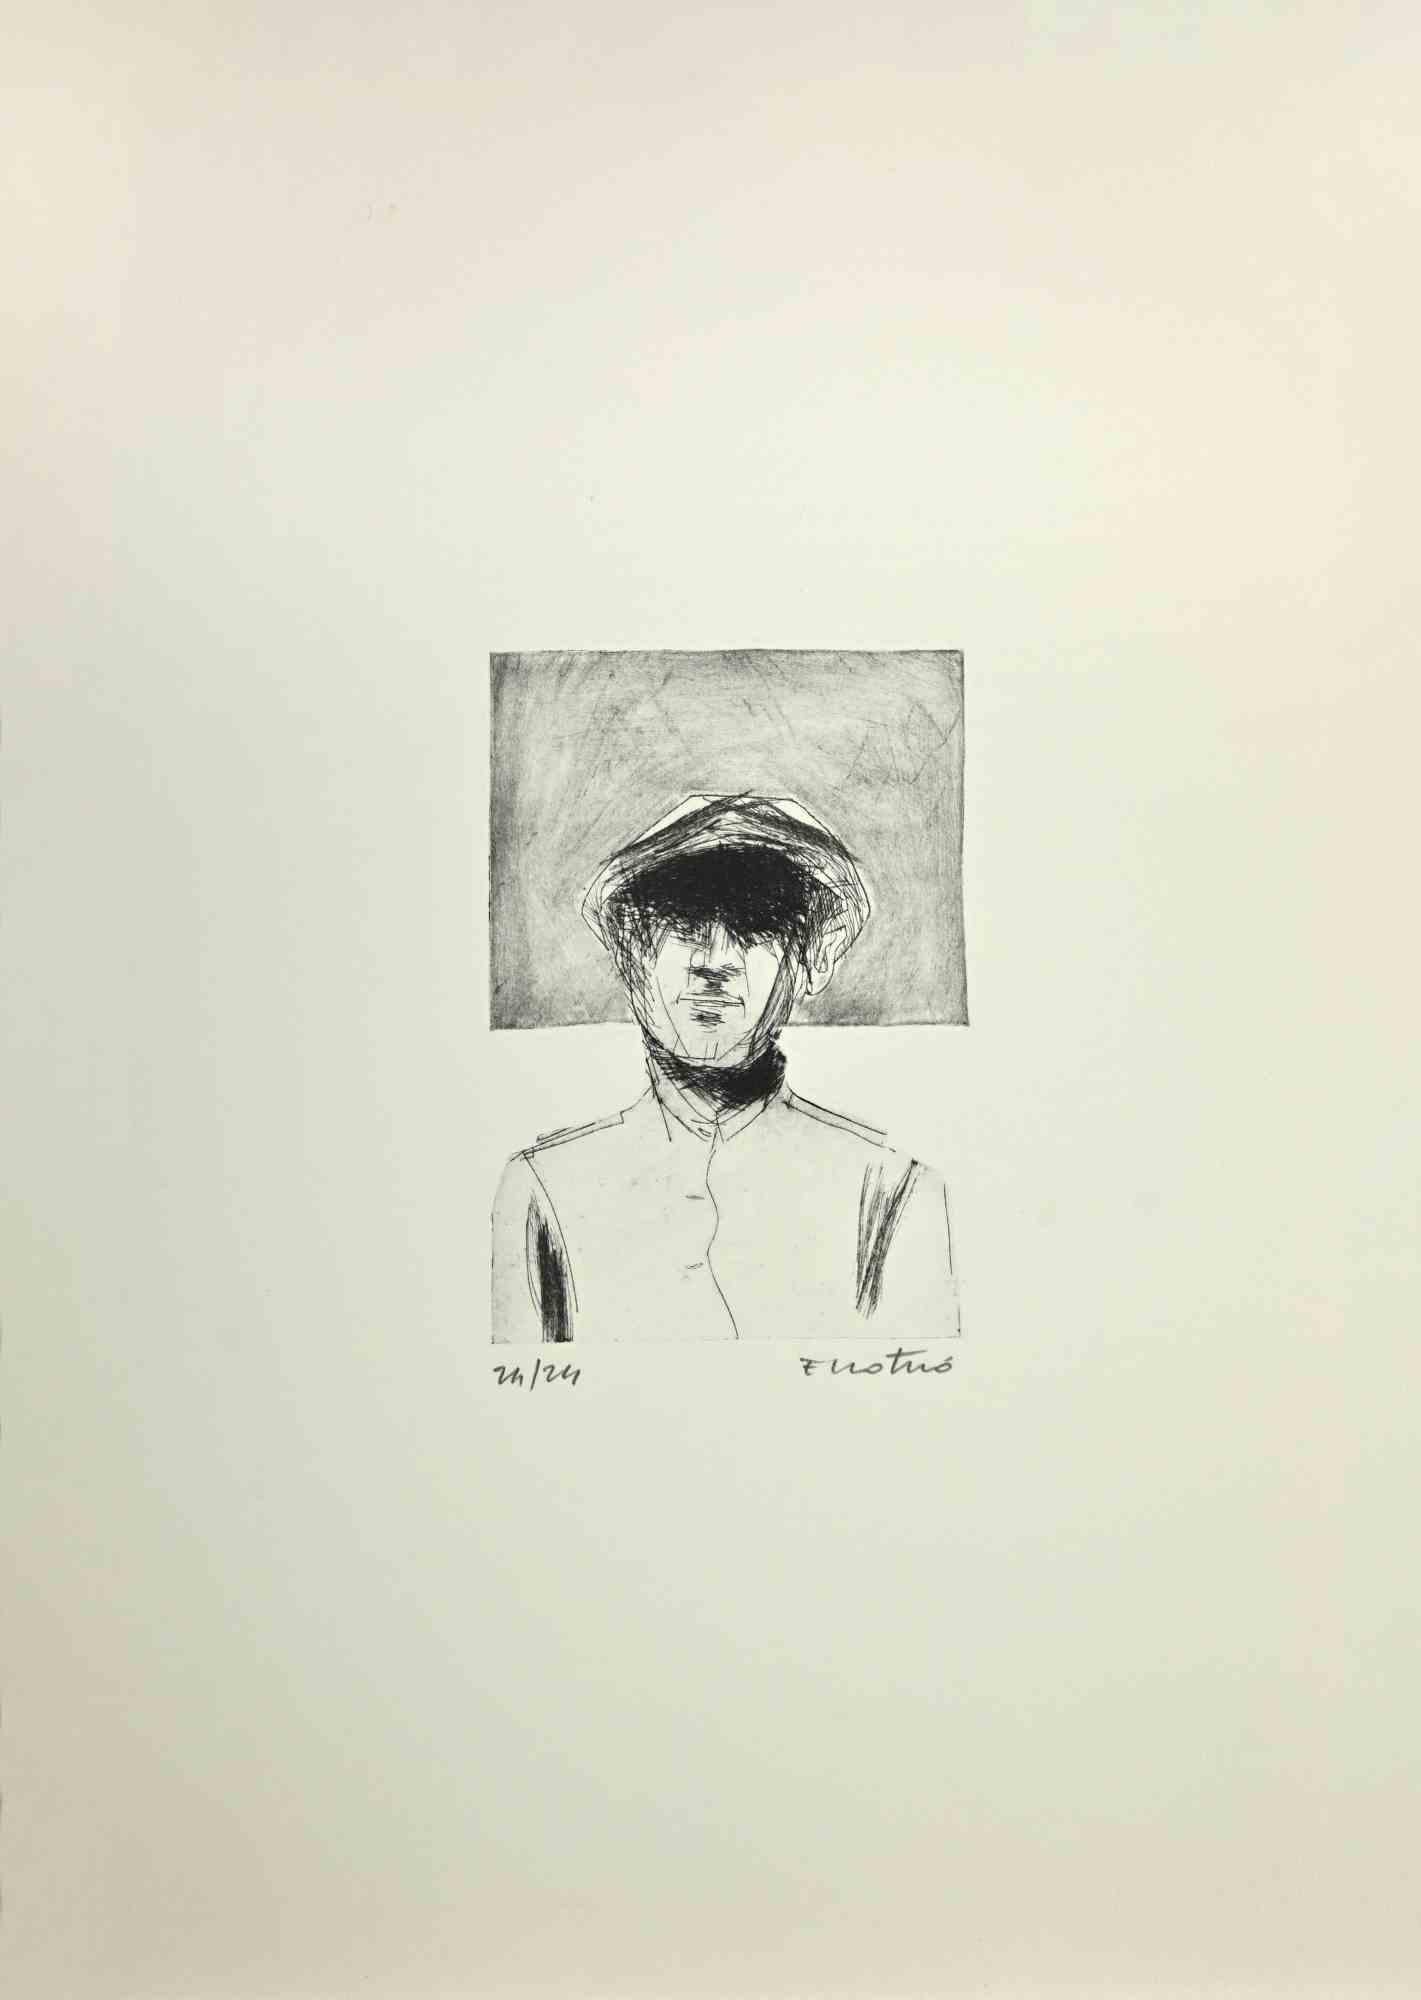 Soldier is an Etching and Aquatint realized by Enotrio Pugliese in 1970s.

Limited edition of 24 copies numbered and signed by the artist.

Good conditions.

Enotrio Pugliese (May 11, 1920 - August 1989) was an Italian painter. Born in Buenos Aires